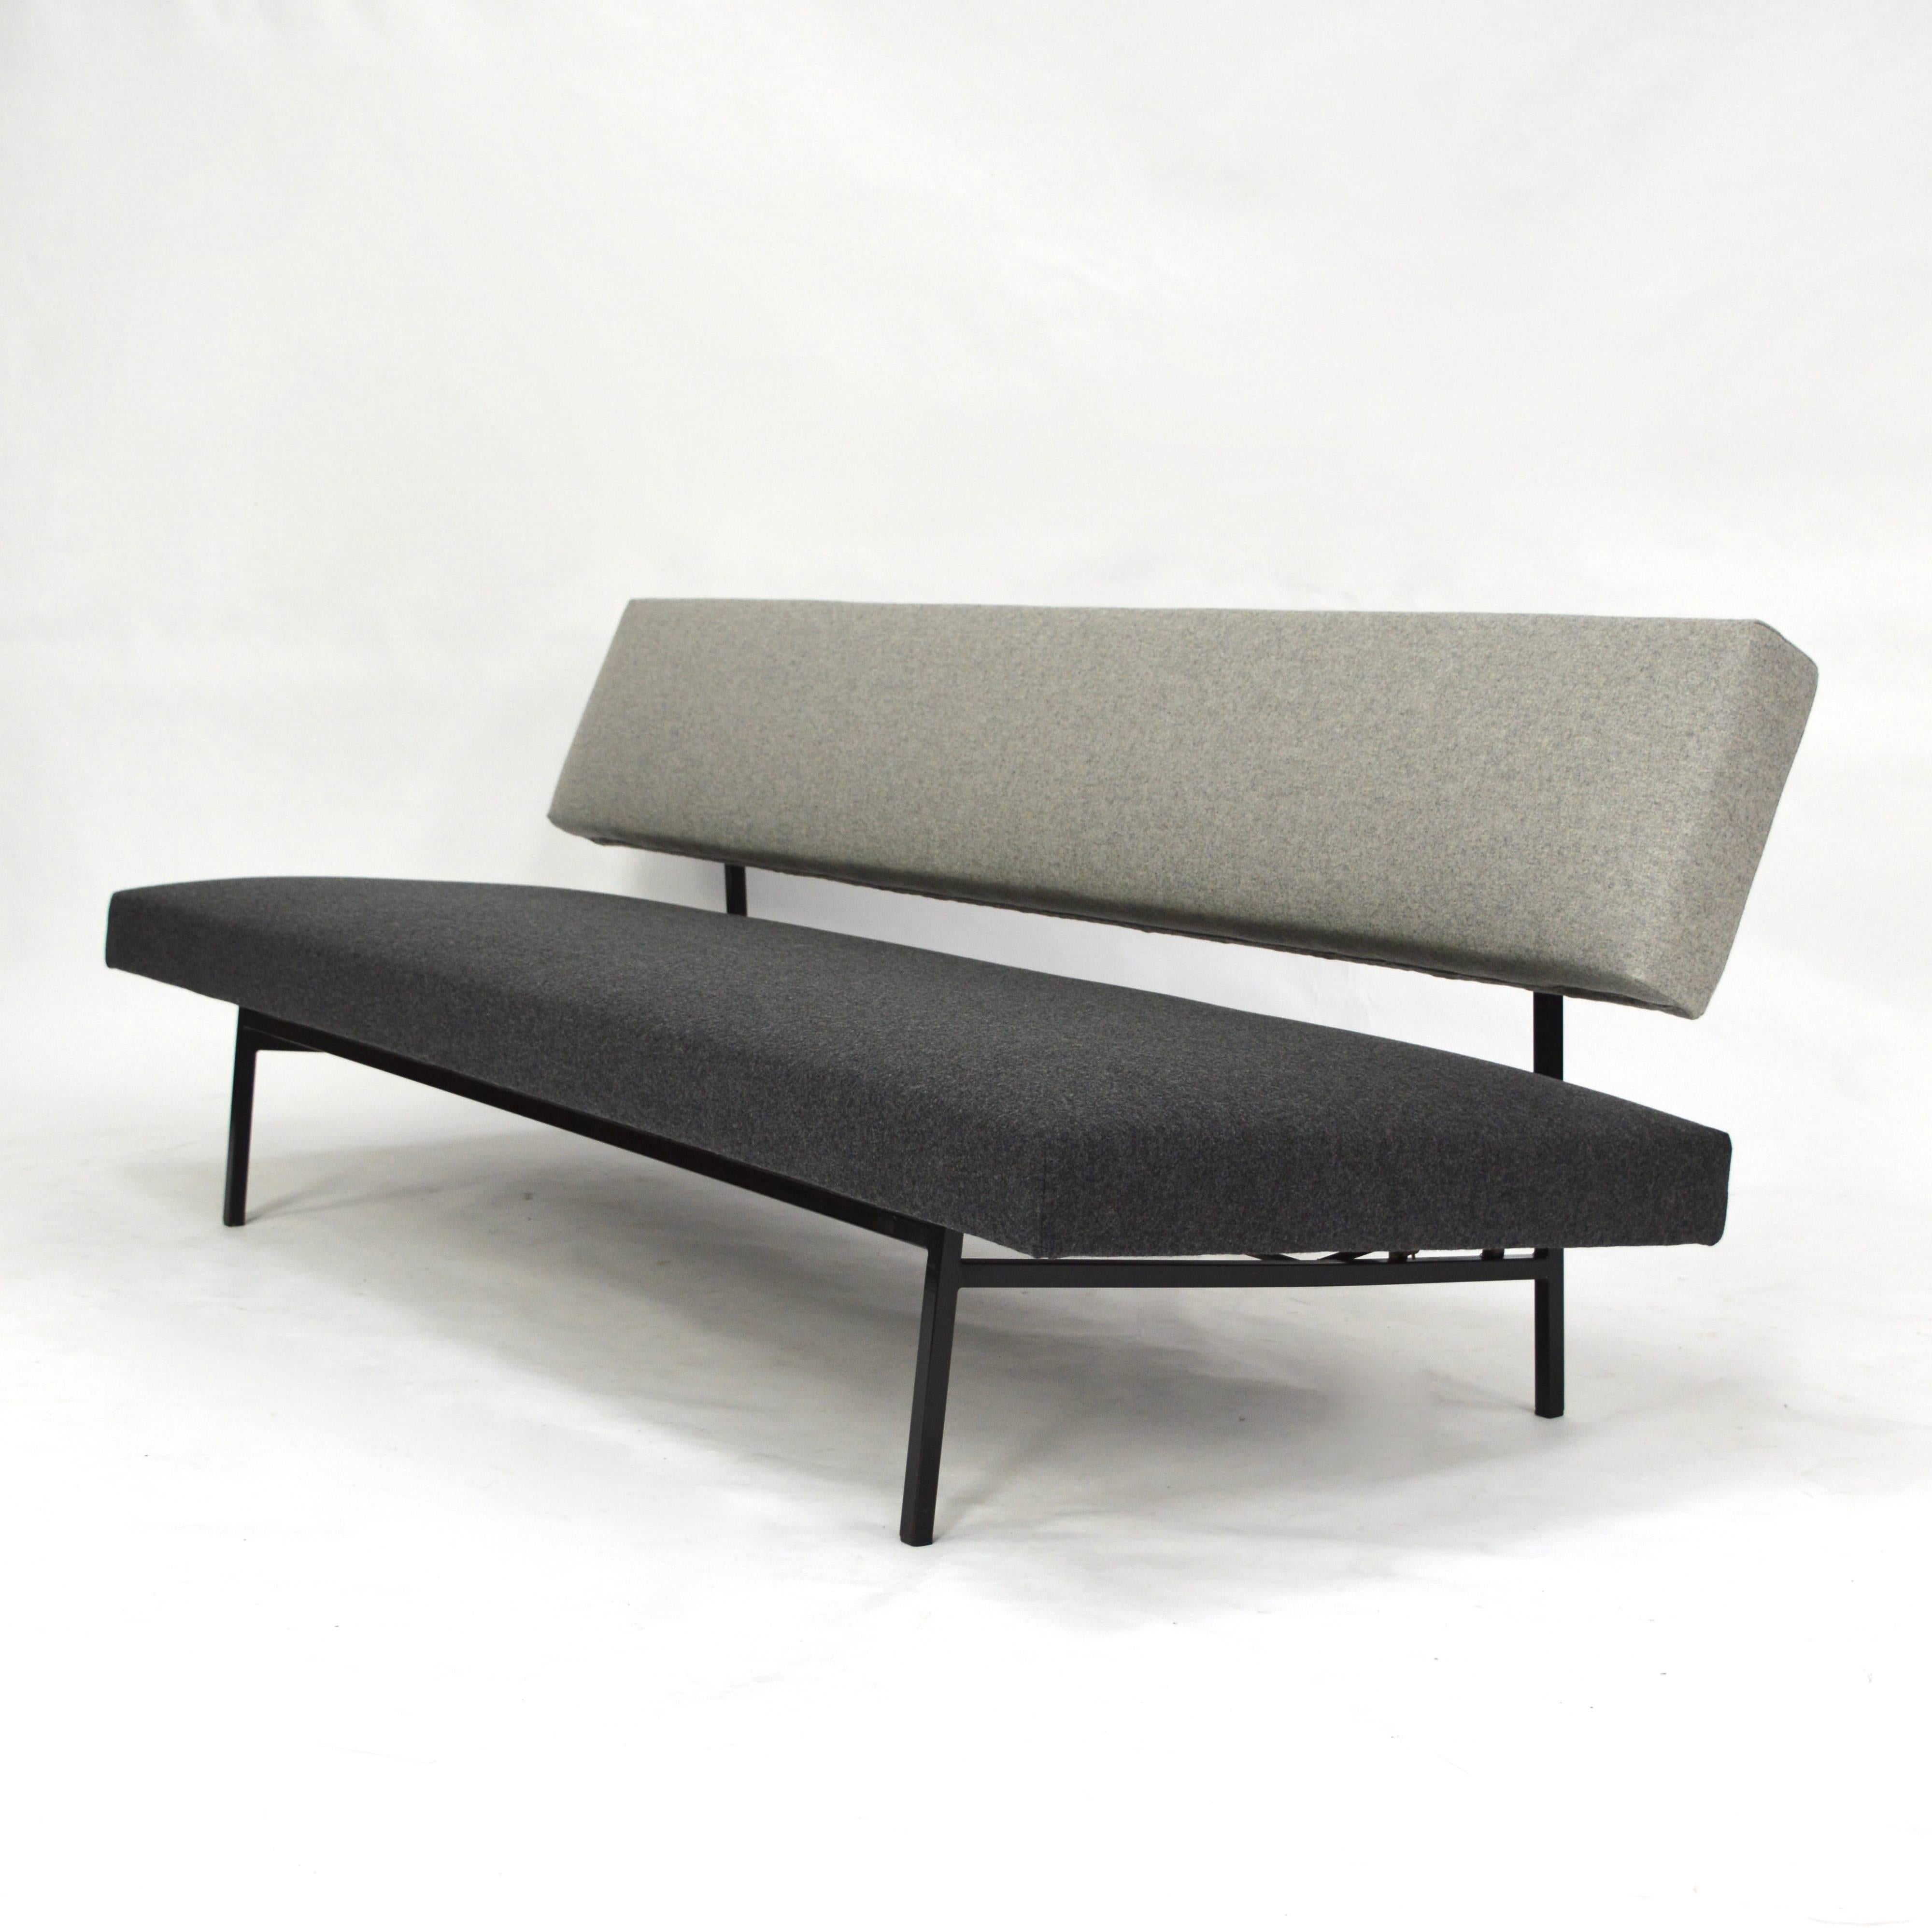 Mid-Century Modern Minimalistic Sofa Daybed by Rob Parry for Gelderland, 1950s